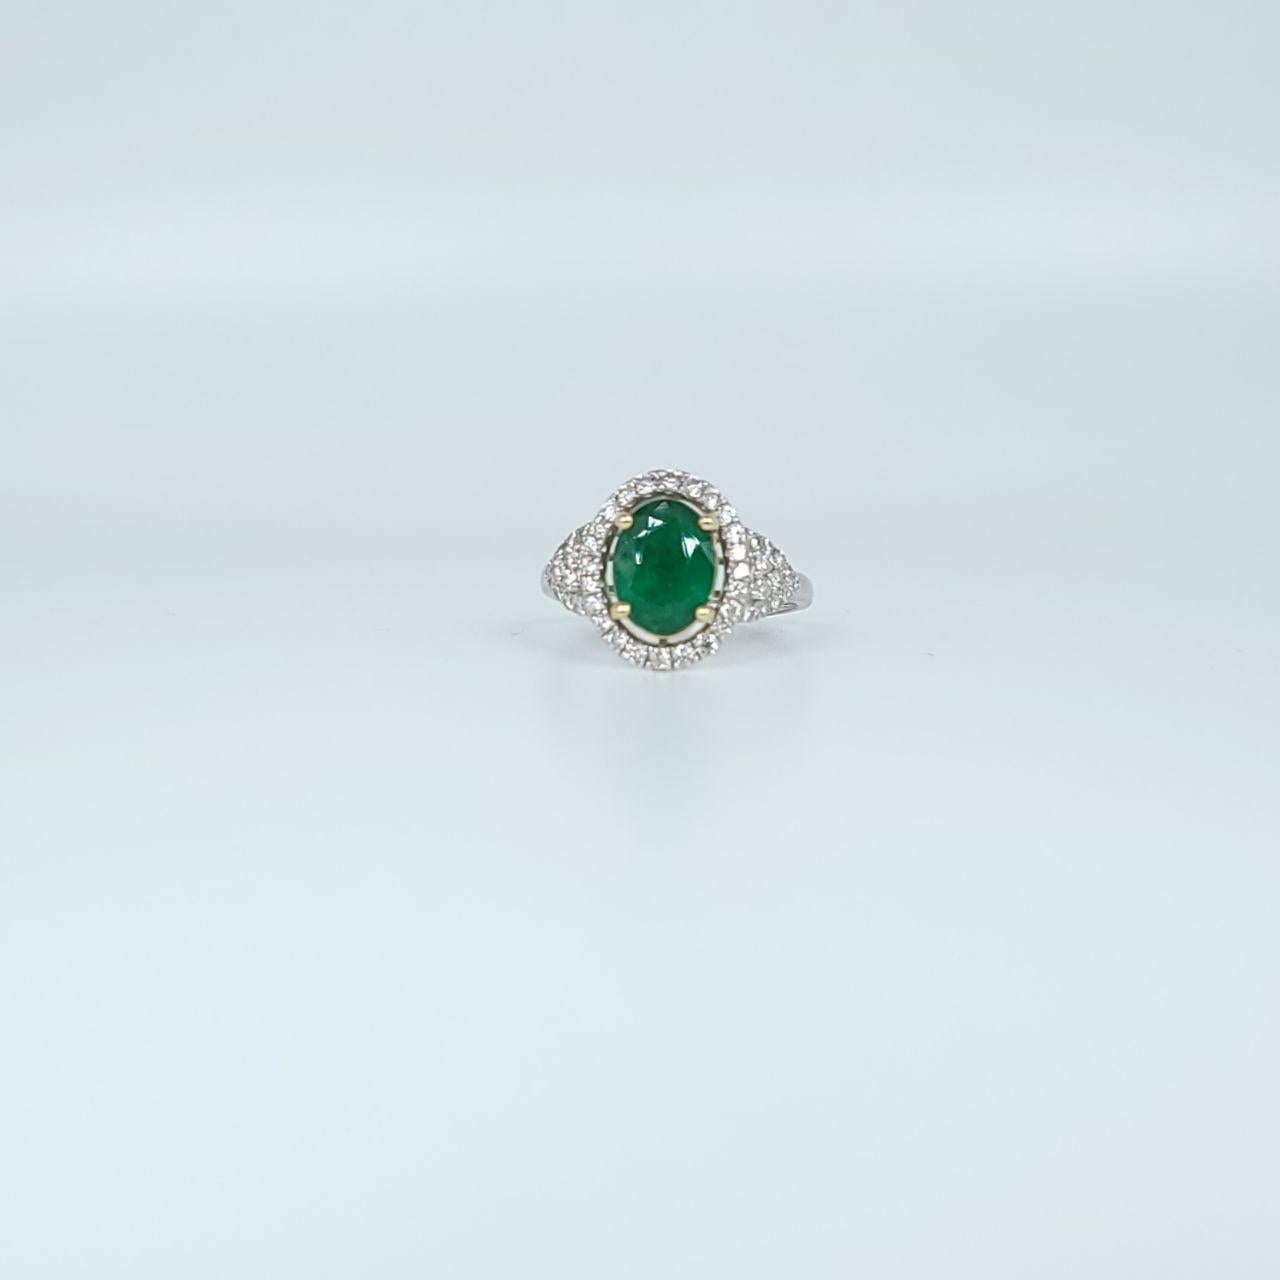 Modern Emerald Diamond Ring Cocktail Diamond Ring with Large Brazilian Emerald For Sale